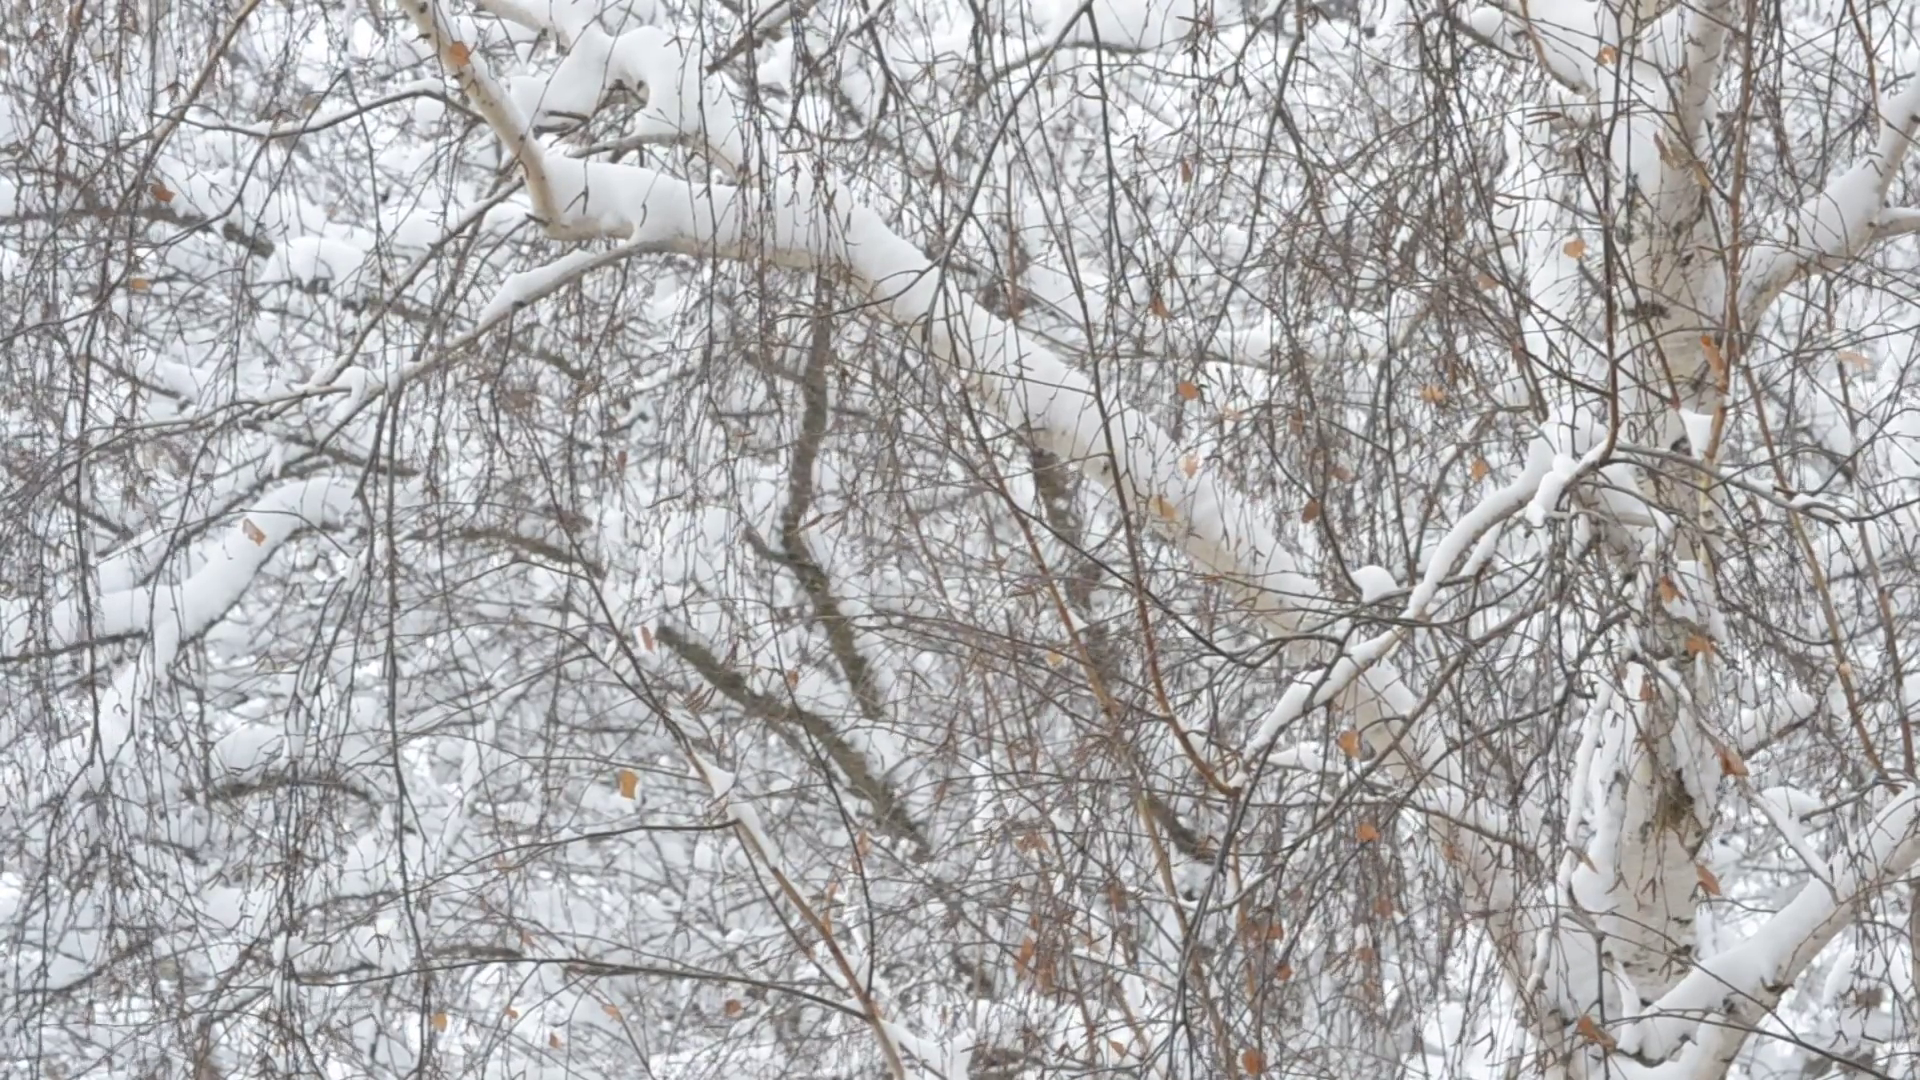 Snow falling on background of birch tree with leafless branches ...